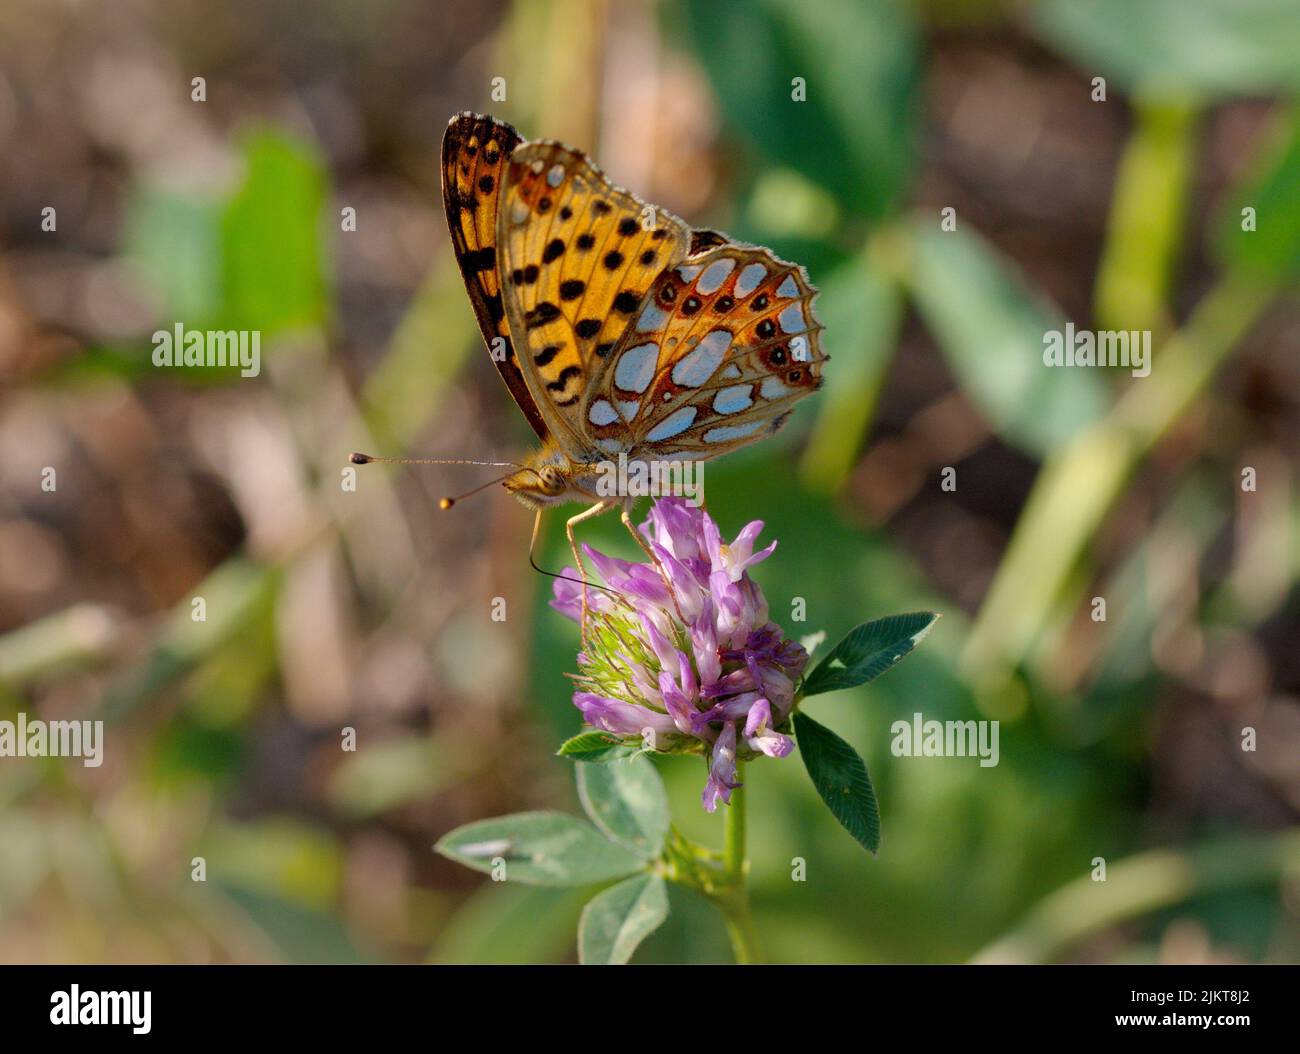 Butterfly on a flower in summer Stock Photo